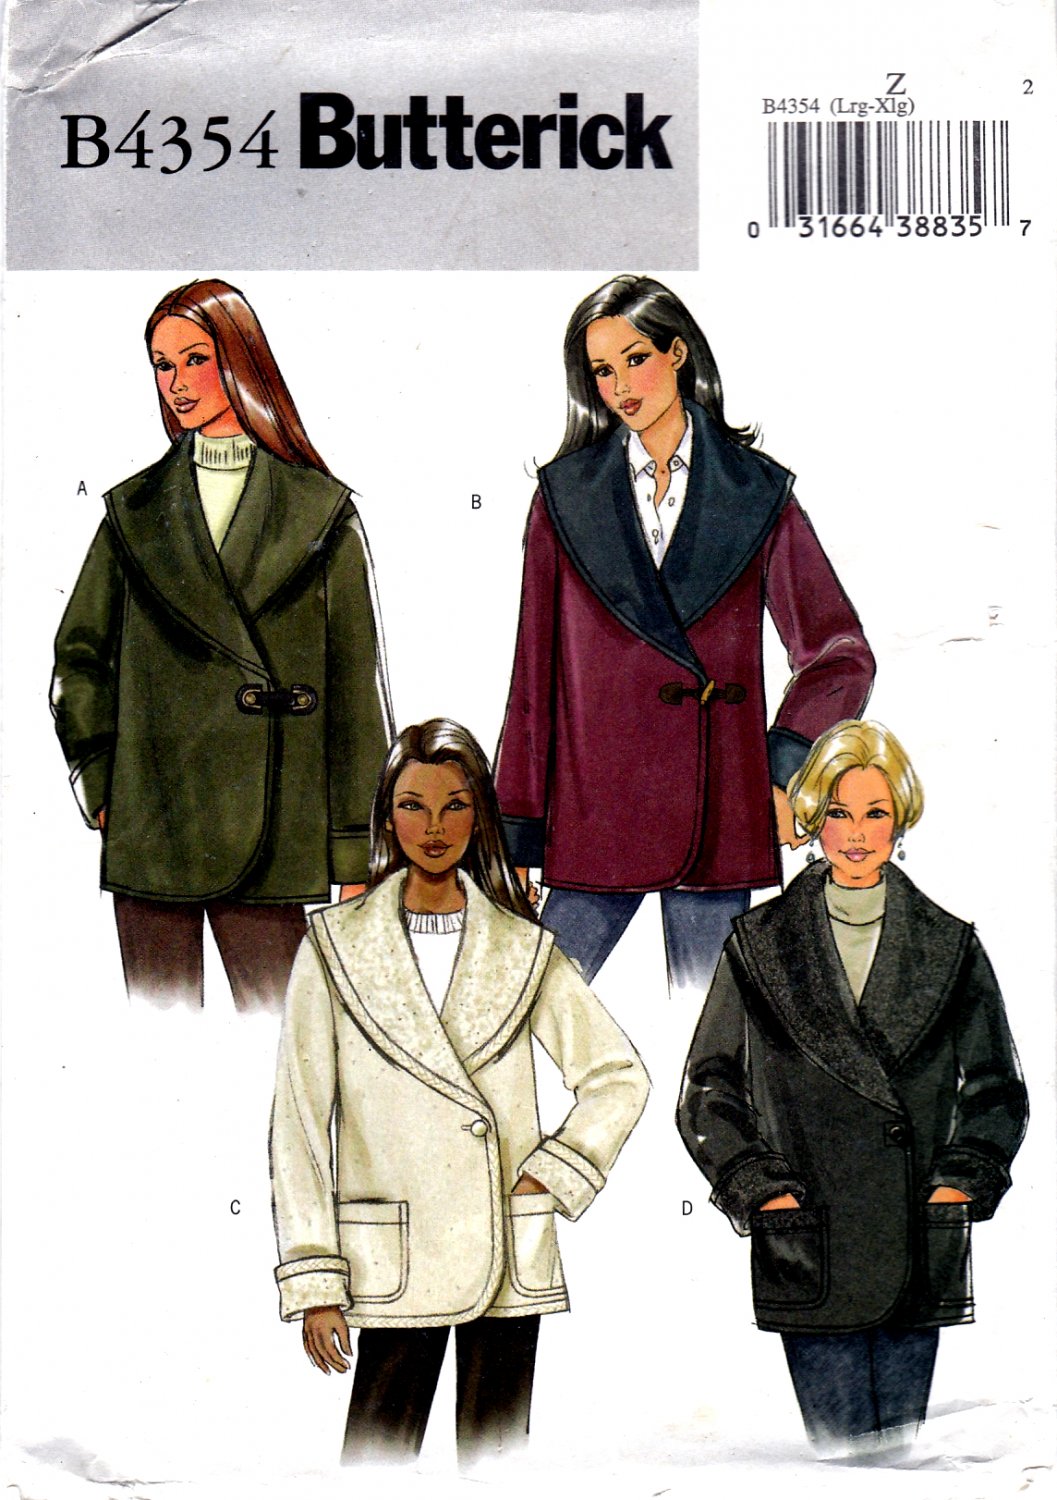 Butterick B4354 Misses Jackets Very Loose Fitting Sewing Pattern Sizes Lrg-Xlg